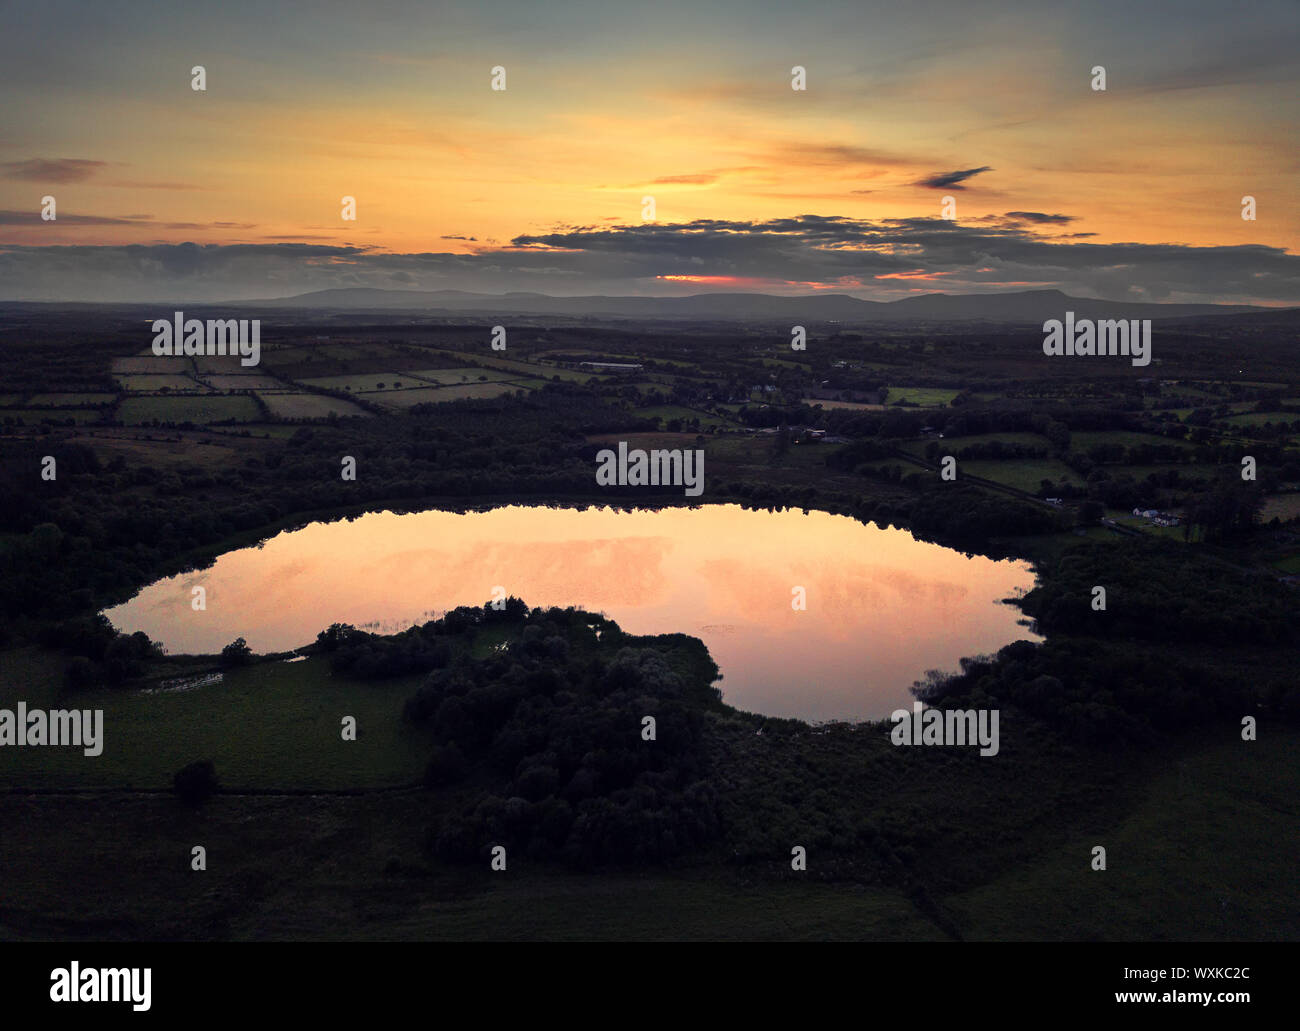 Aerial view of Clonty Lough near Ardlougher at sunset, County Cavan, Ireland Stock Photo